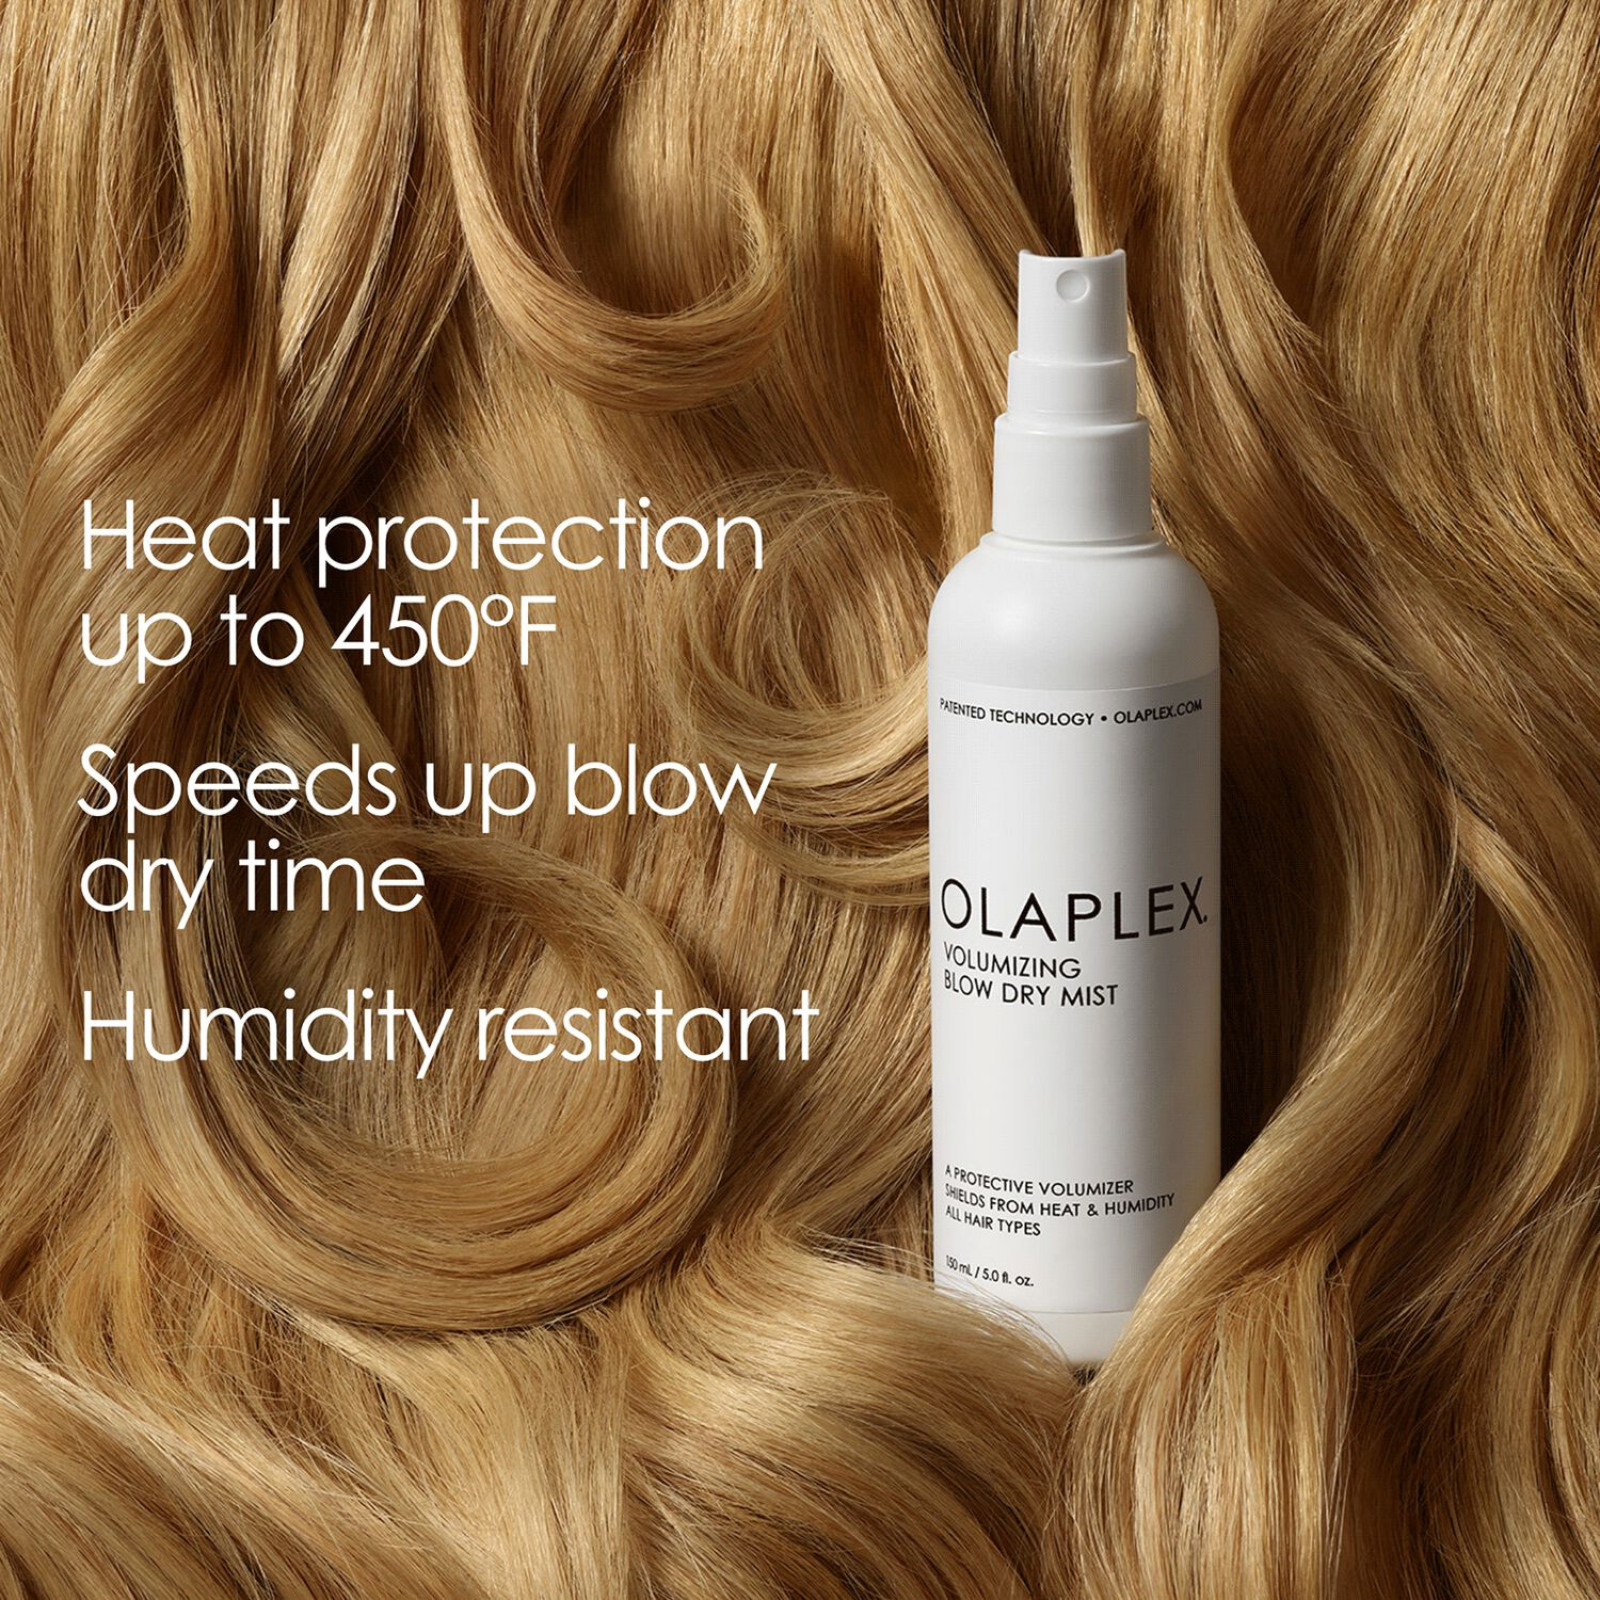 The Volumizing Blow Dry Mist repairs and protects hair for faster, healthier-looking blowouts with buildable volume with lasting body and bounce. The Volumizing Blow Dry Mist speeds up blow dry, provides humidity resistance and heat protection up to 450ºF/232ºC. With Volumizing Blow Dry Mist there is no crunchy or sticky feeling, just touchable soft, shiny, bouncy hair. The Volumizing Blow Dry Mist is Sulfate Free and PH Balanced.